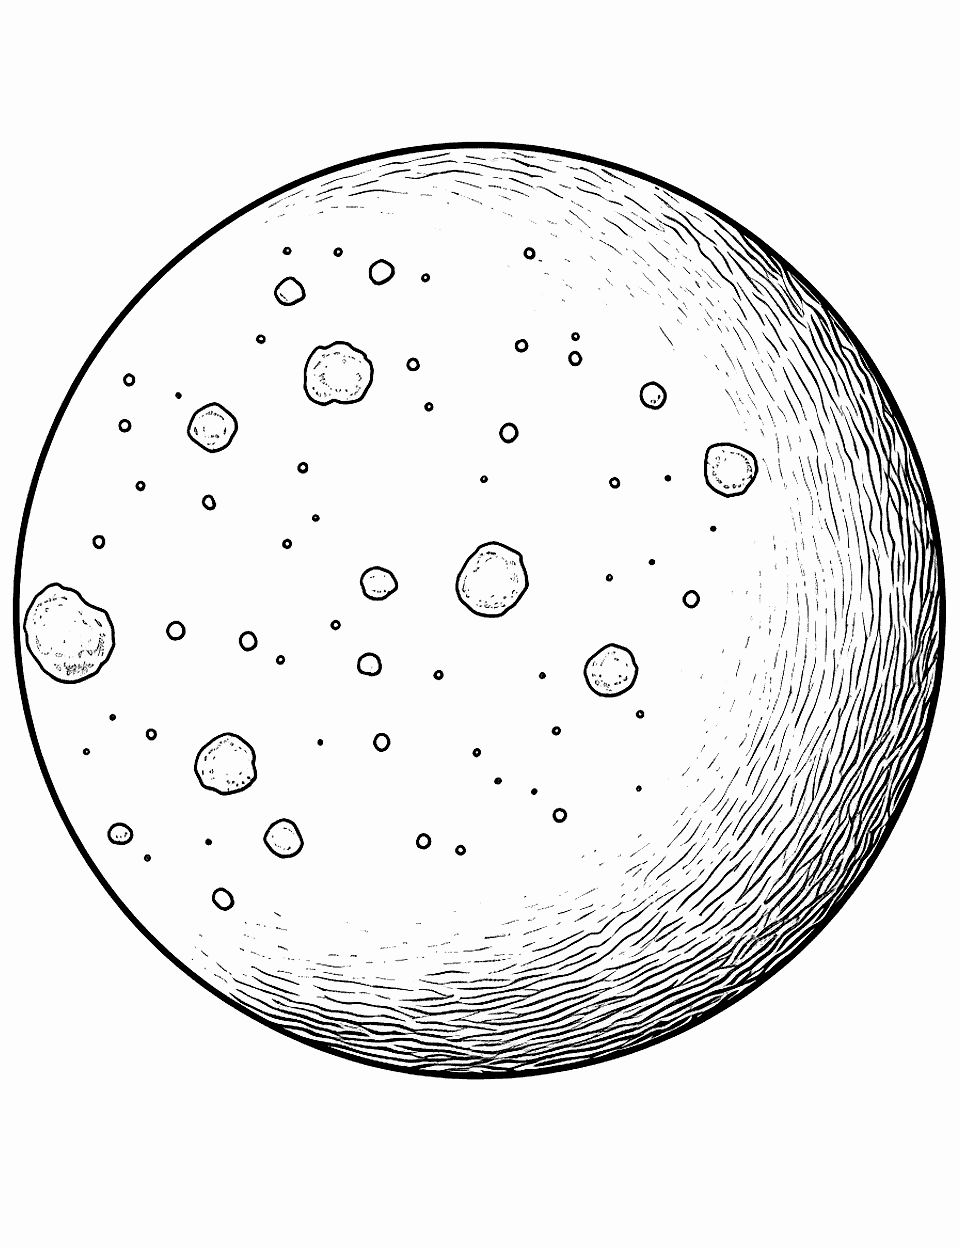 Jupiter's Moon Solar System Coloring Page - Jupiter’s largest moon, with surface details.